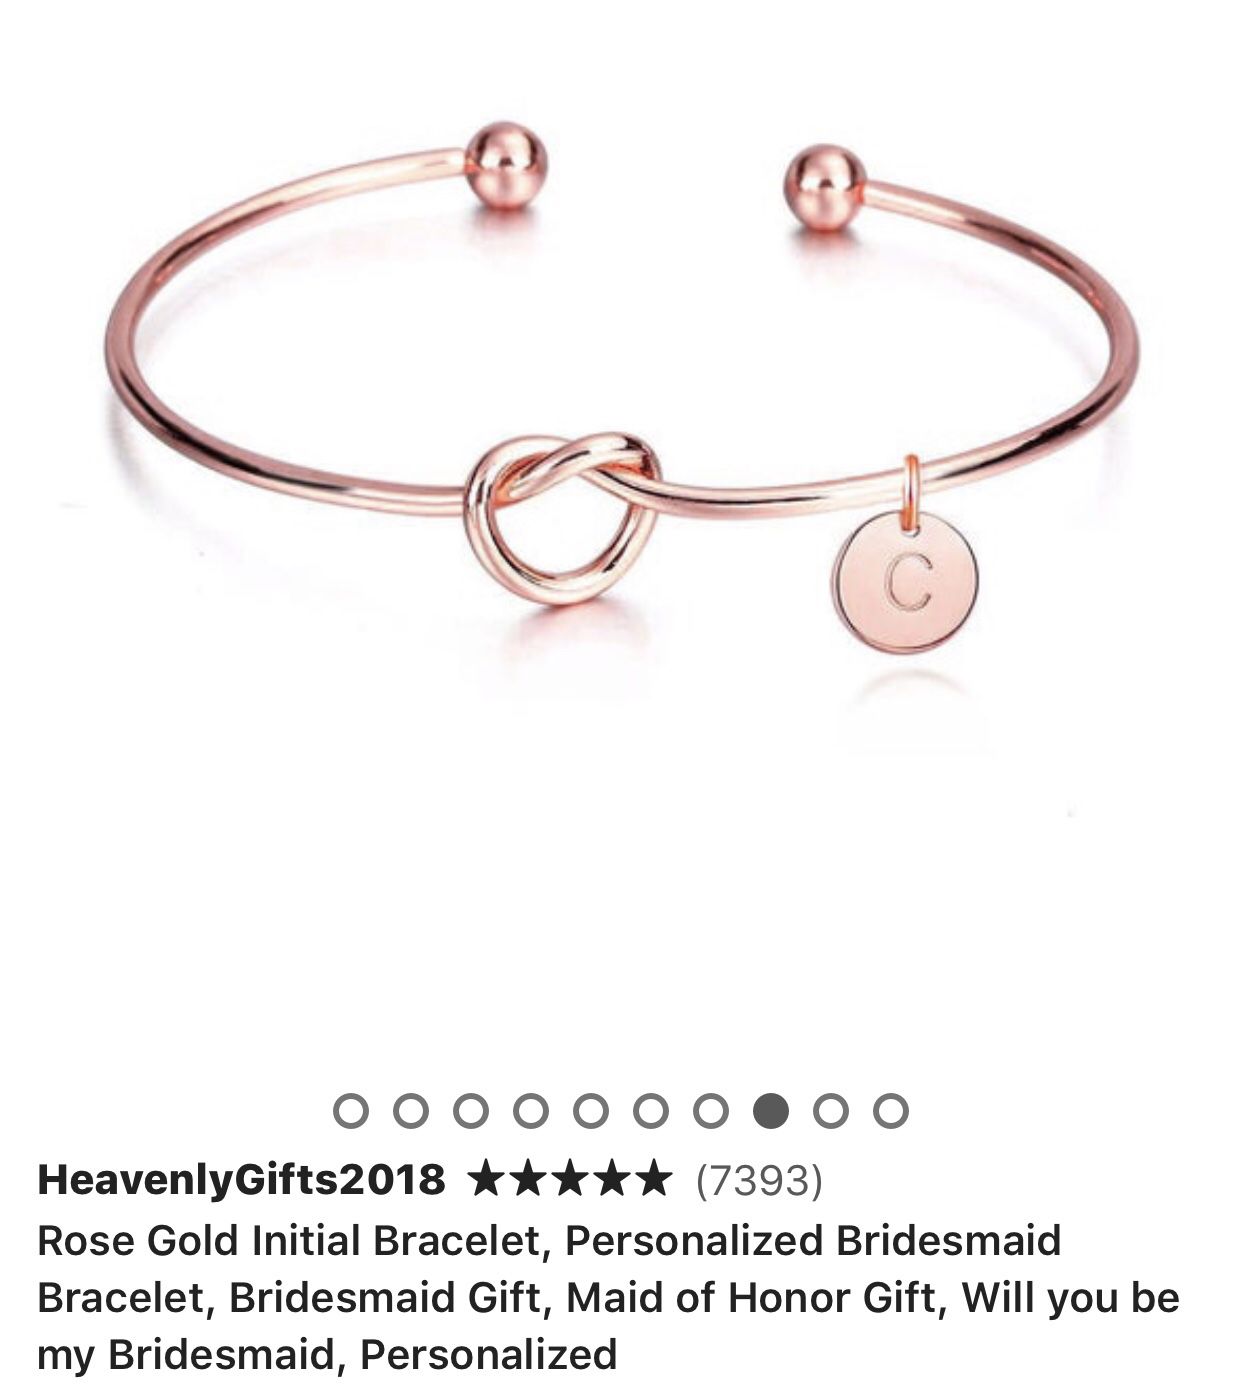 Rose Gold Initial Bracelet, Personalized Bridesmaid Bracelet, Bridesmaid Gift, Maid of Honor Gift, Will you be my Bridesmaid, Personalized